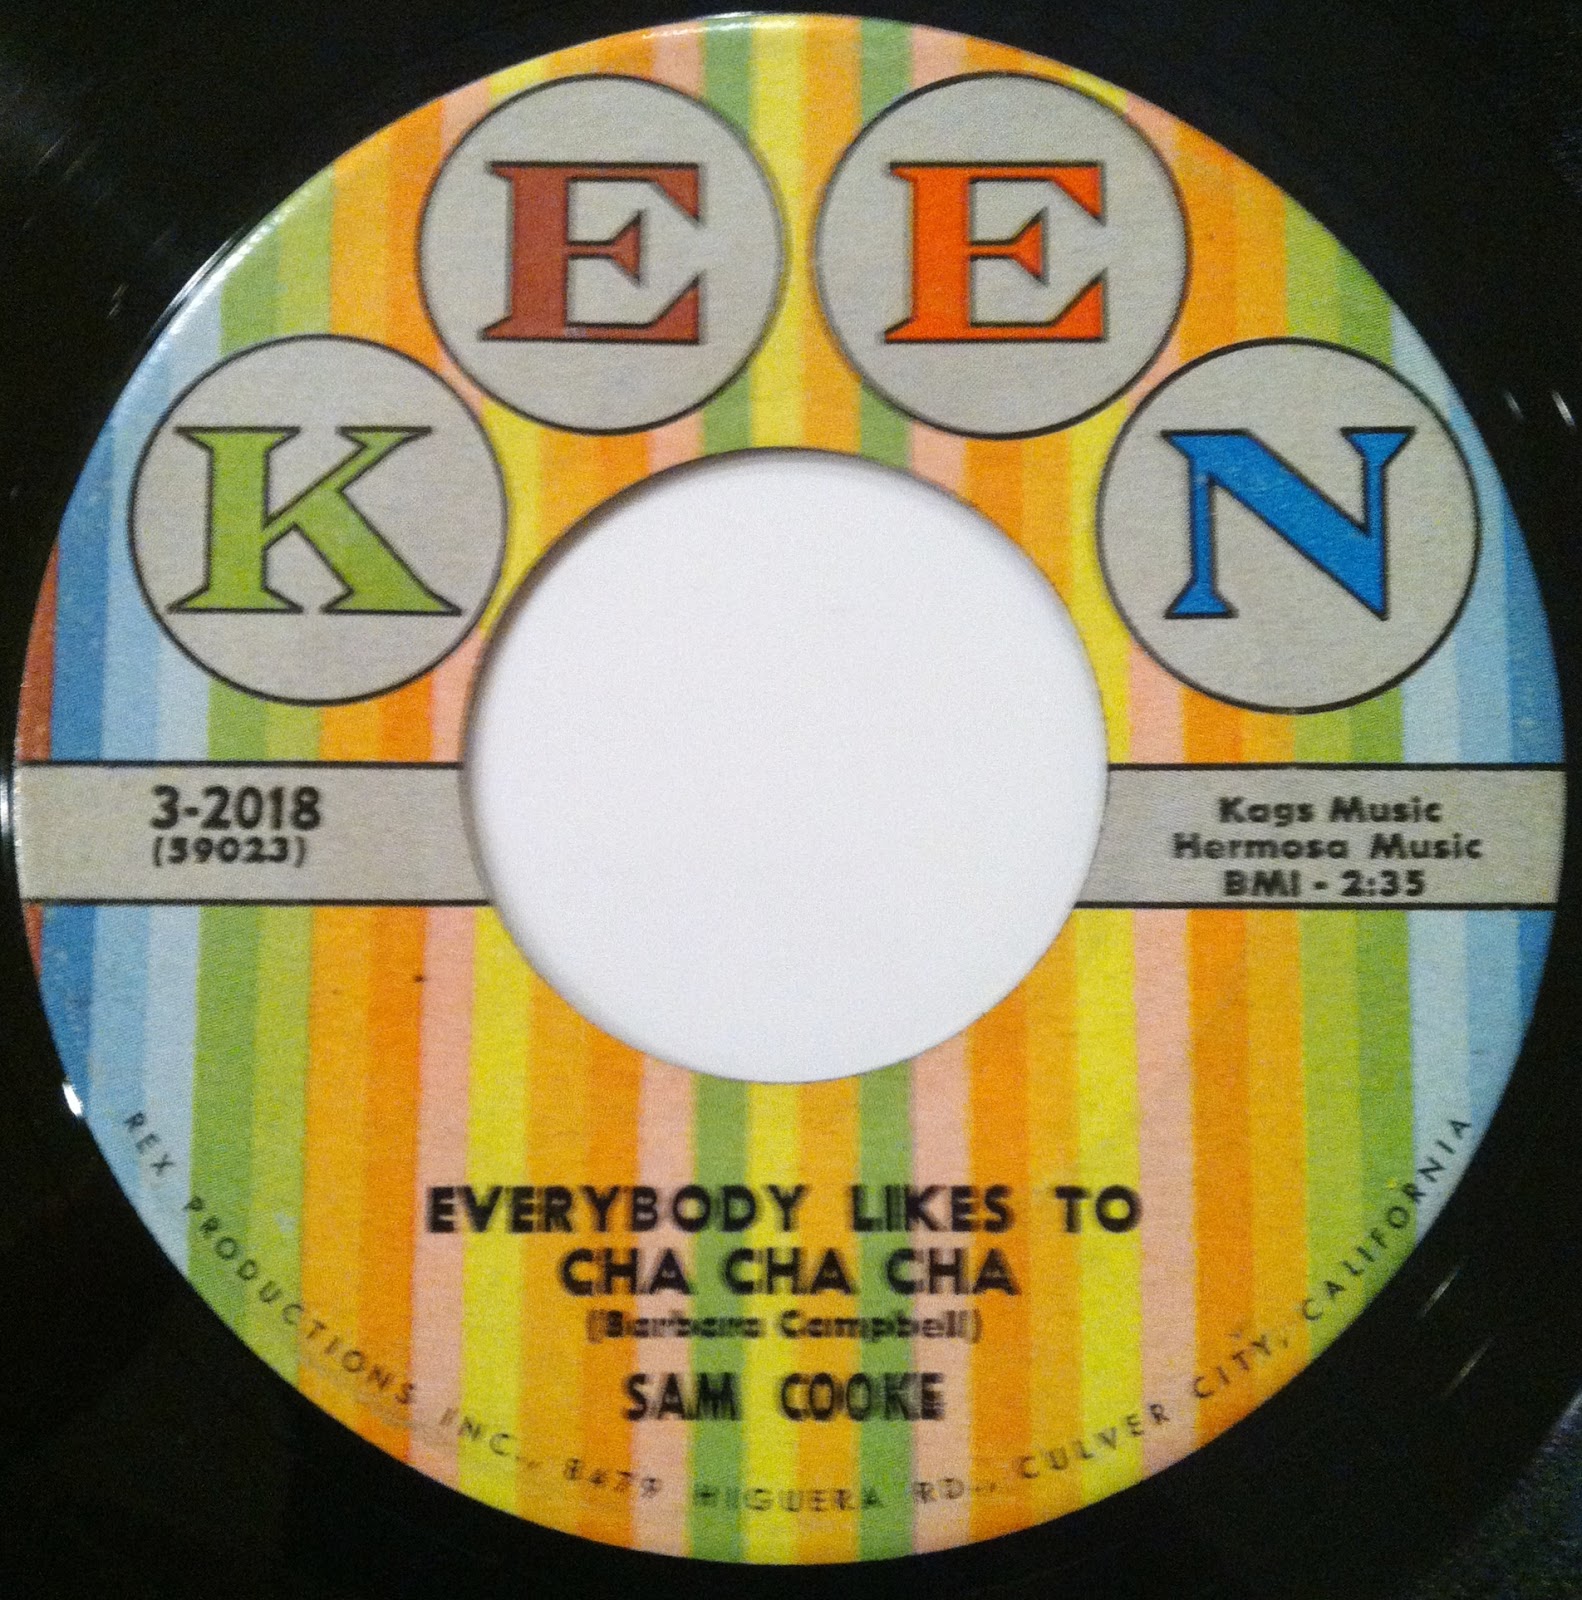 Everybody likes them. Sam Cooke - the keen records story CD Covers. Sam Cooke - the complete keen years CD Covers.